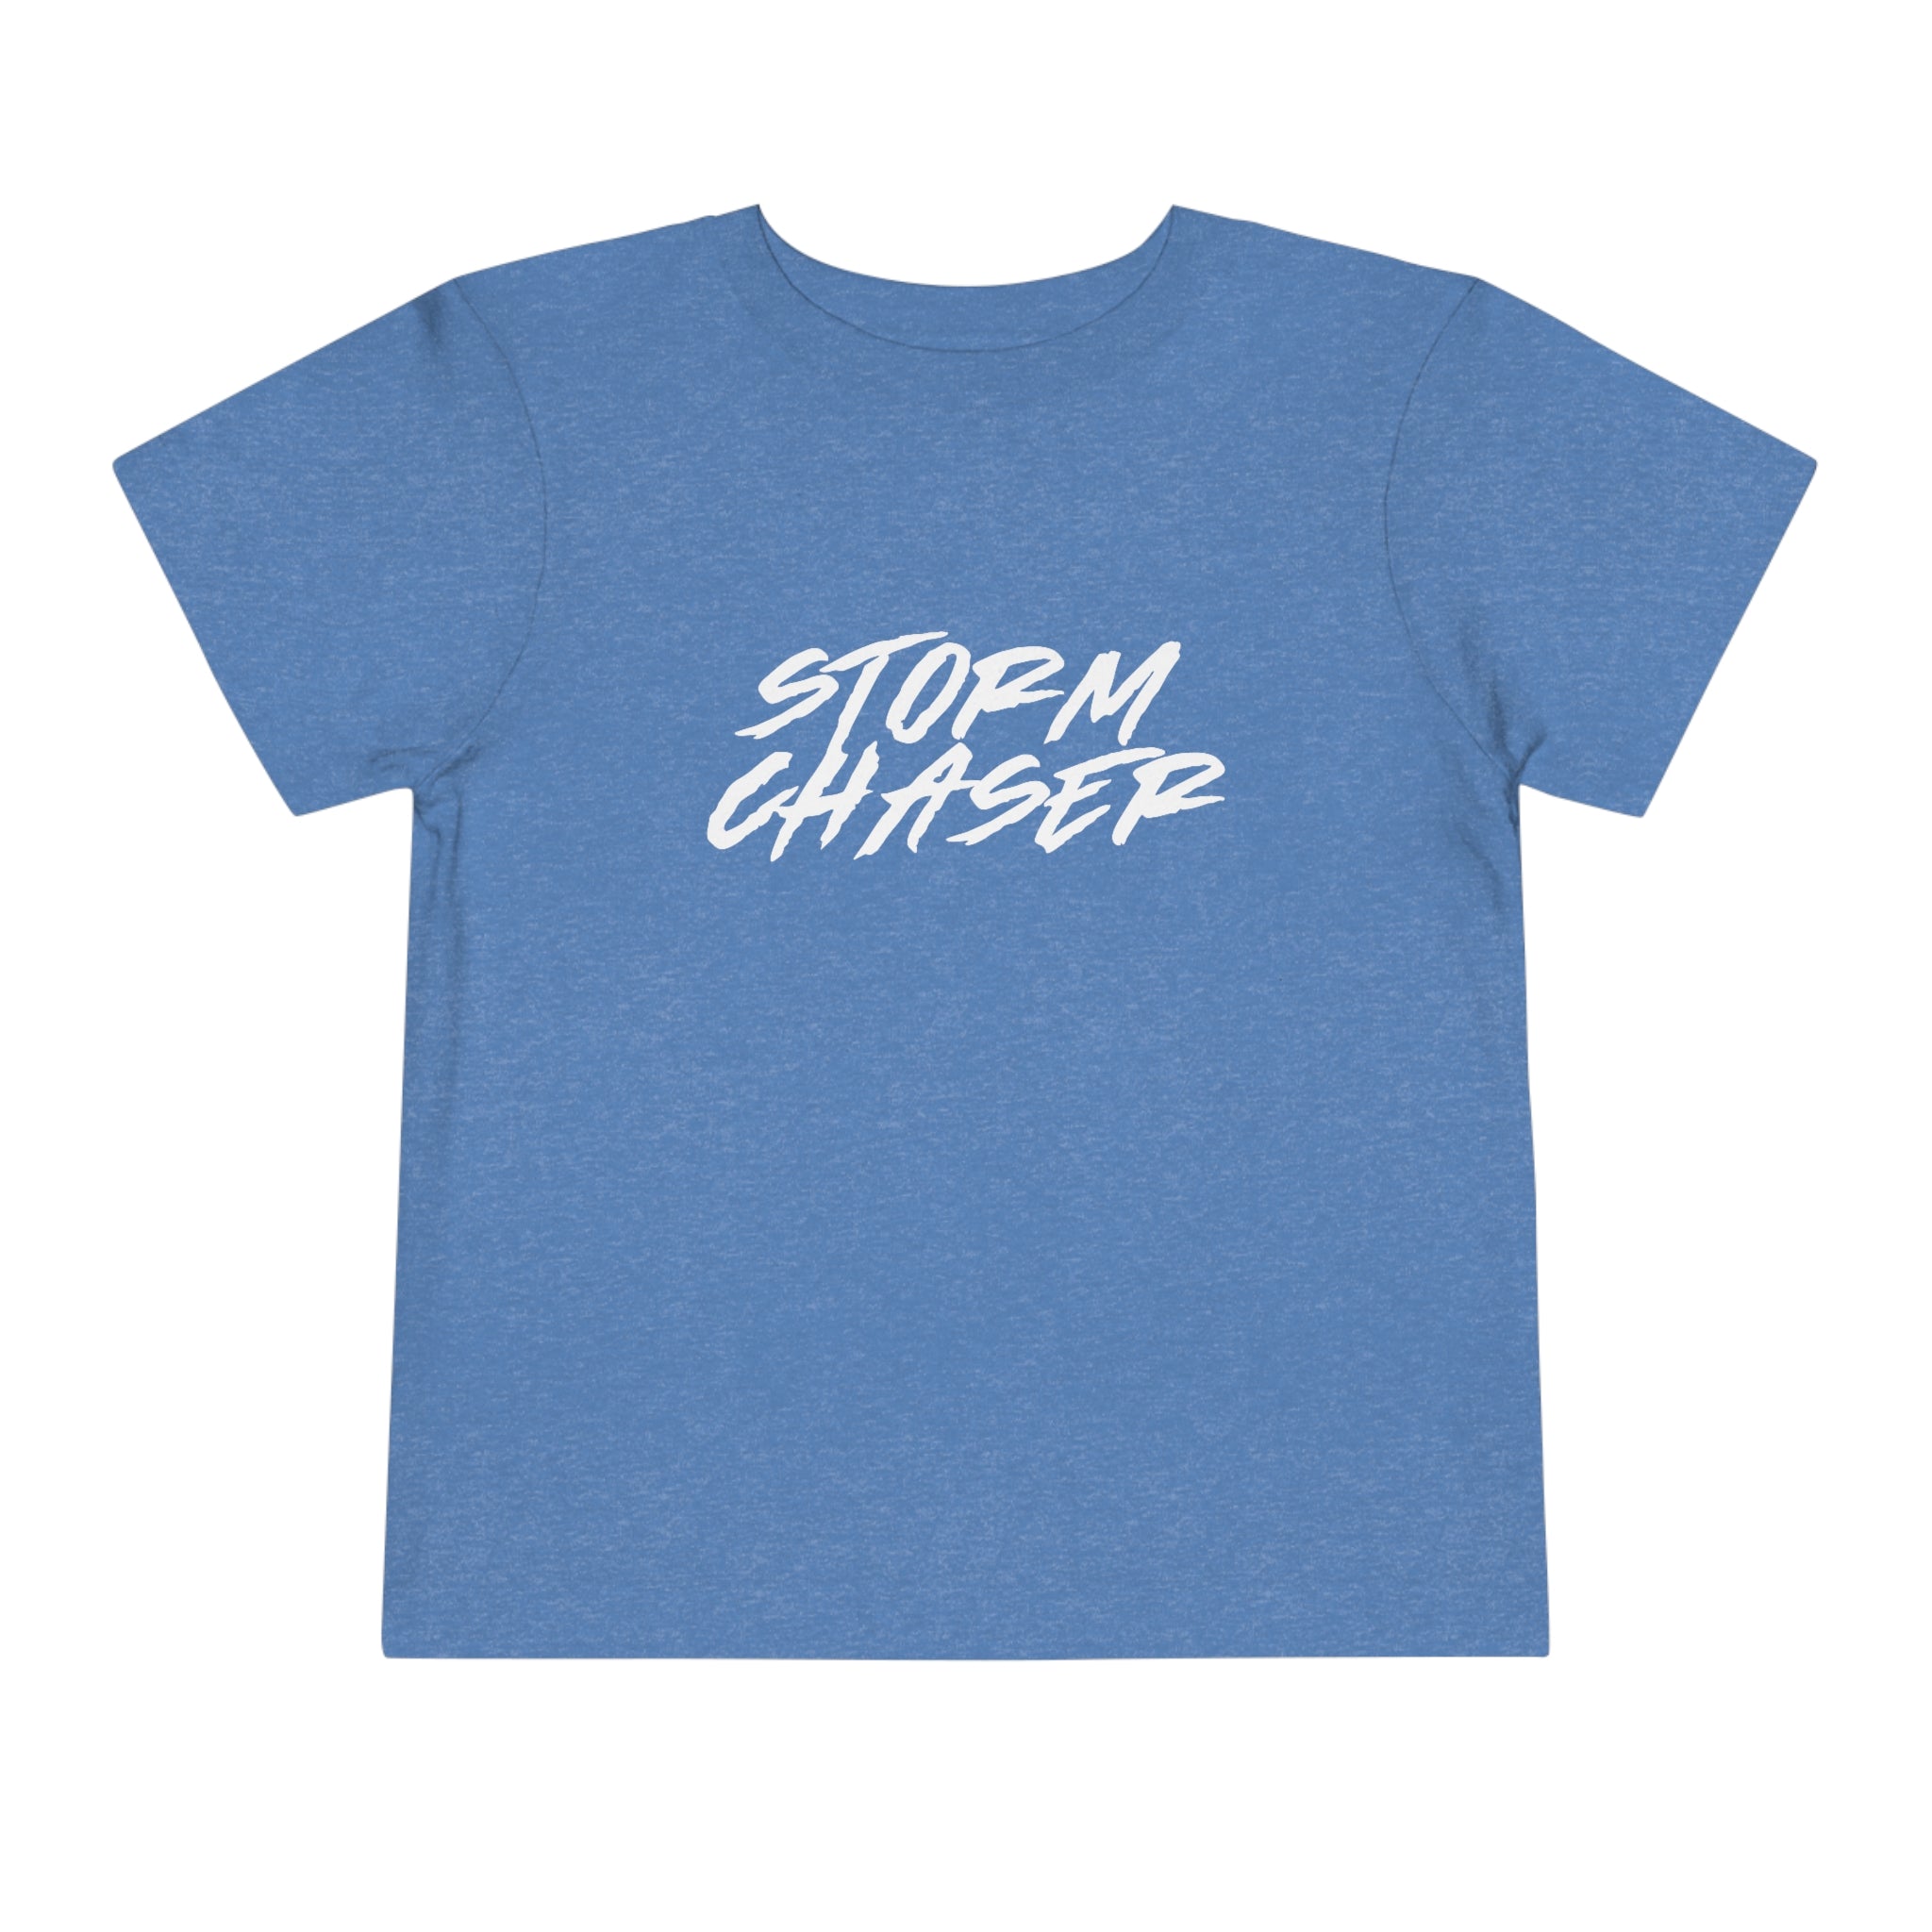 Storm Chaser Toddler Tee 